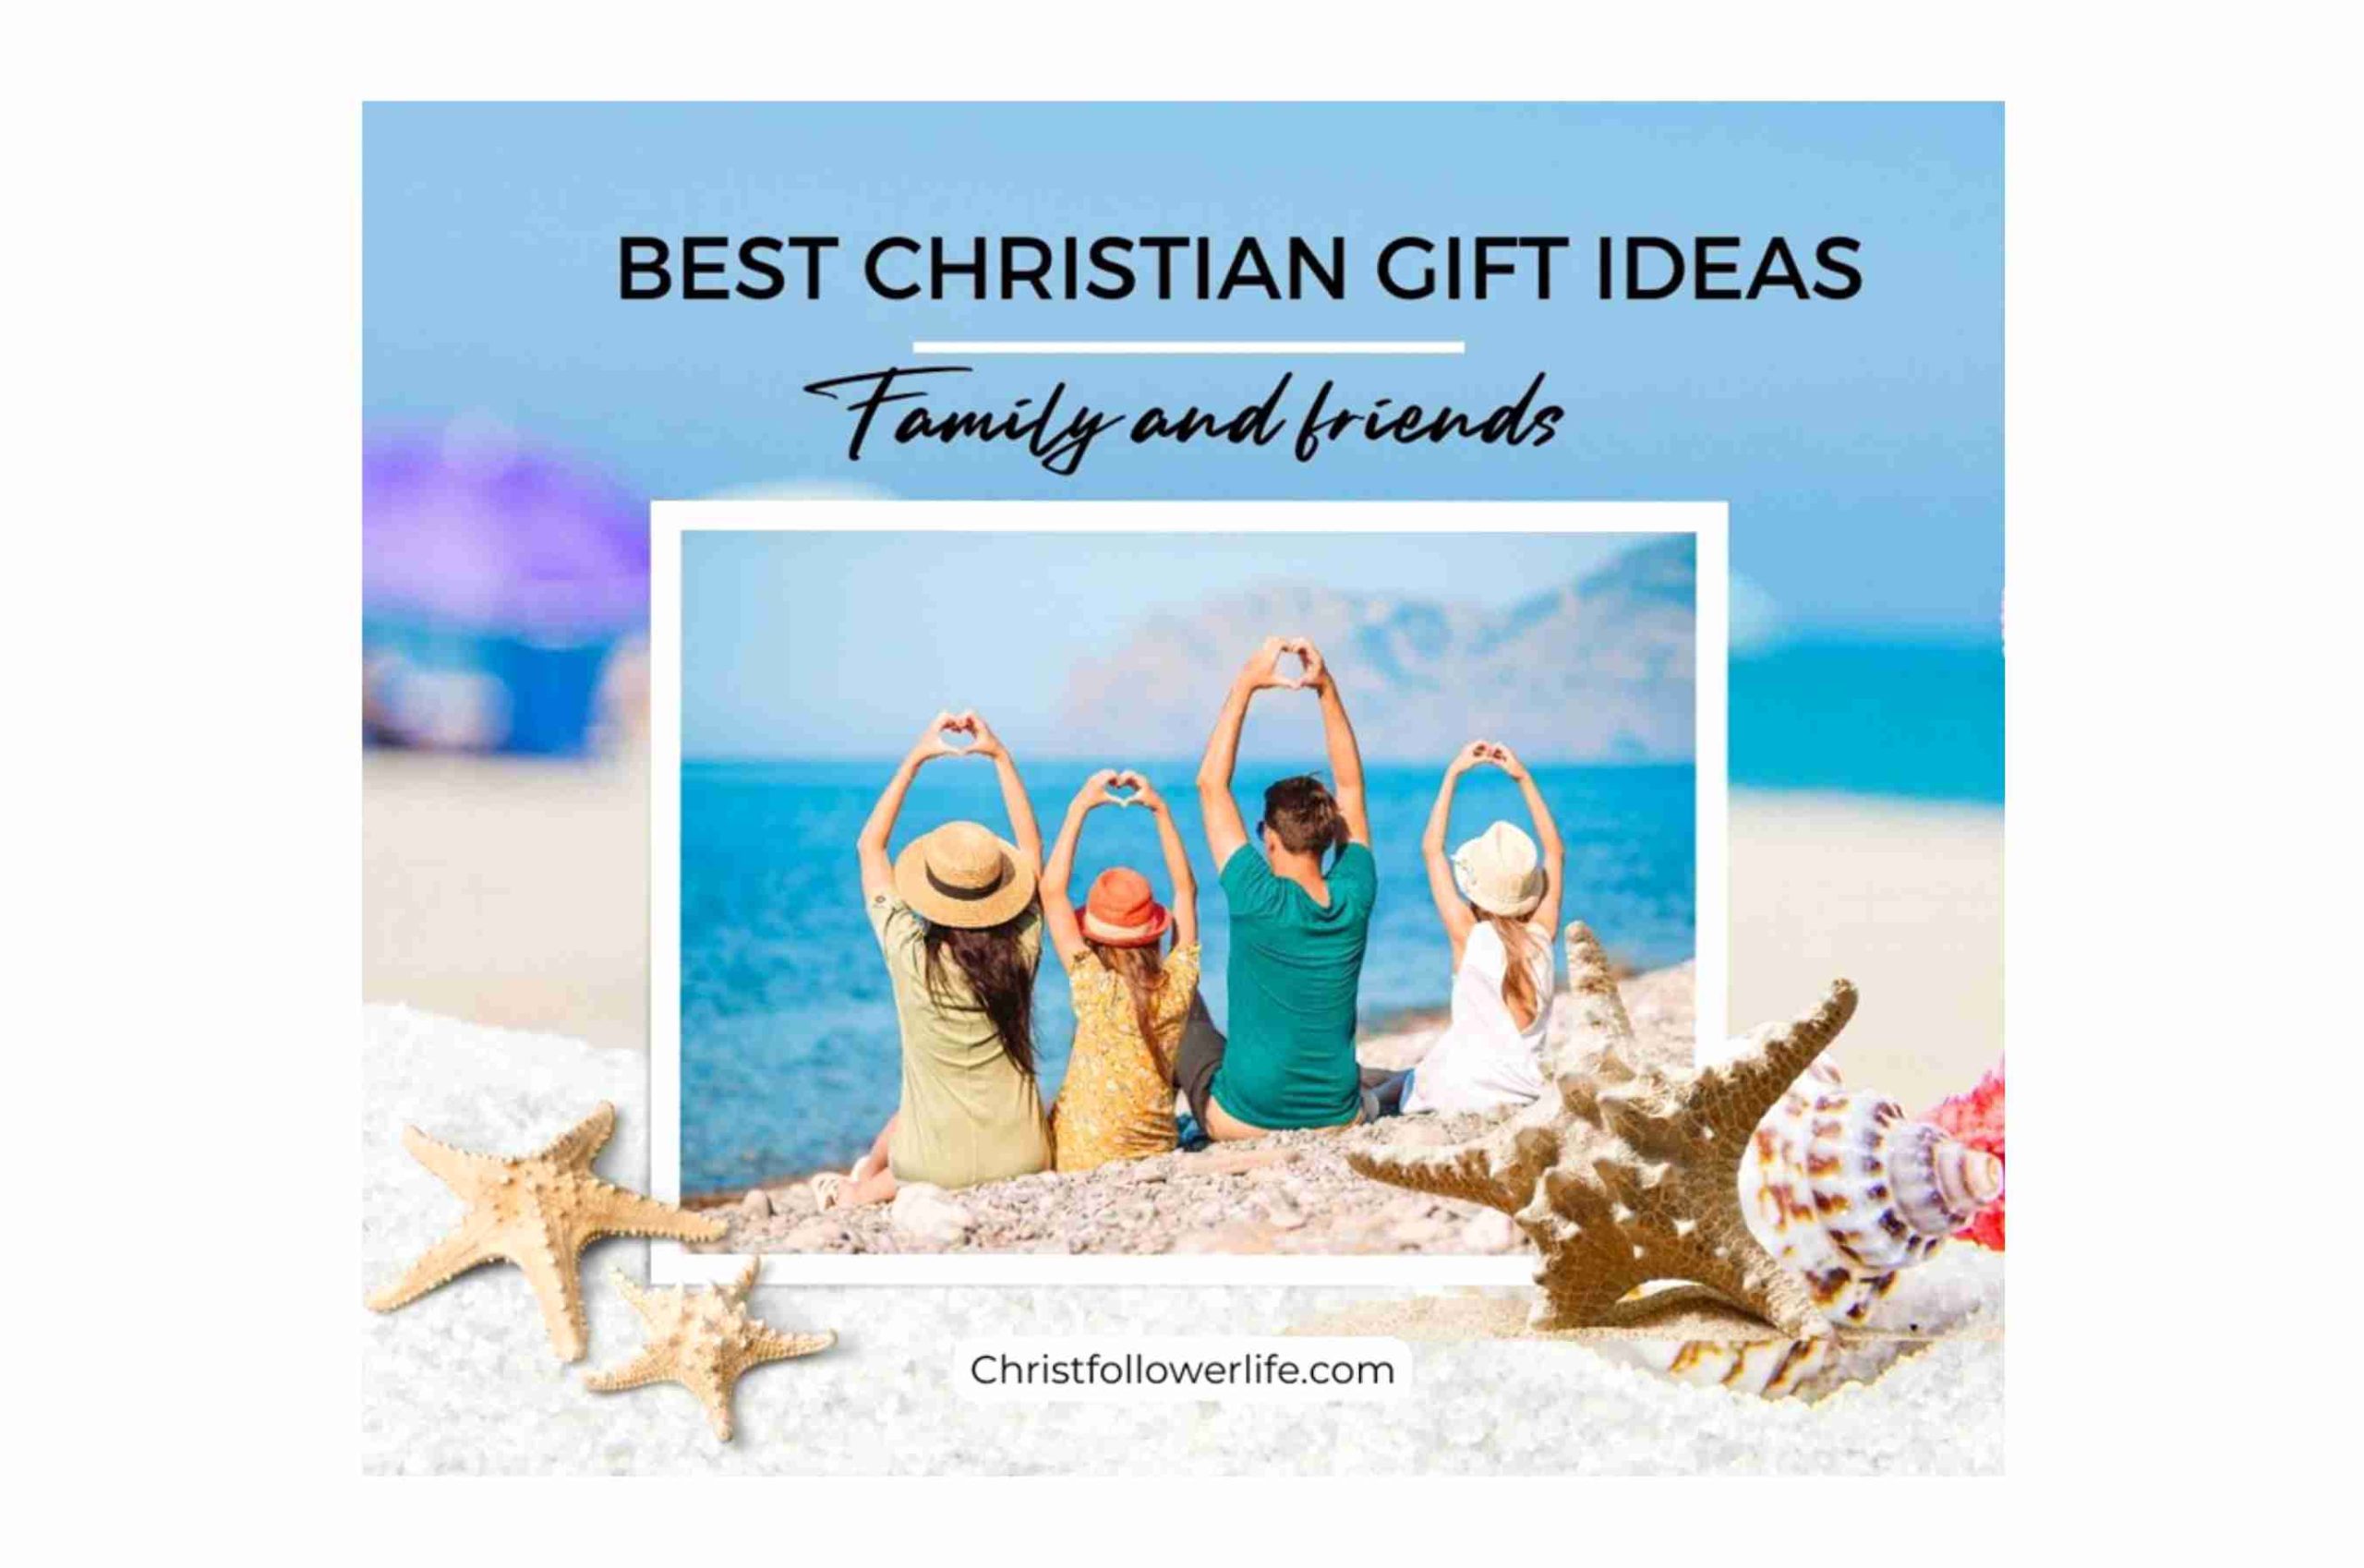 Top 8 Christian Gifts for Your Family and Friends